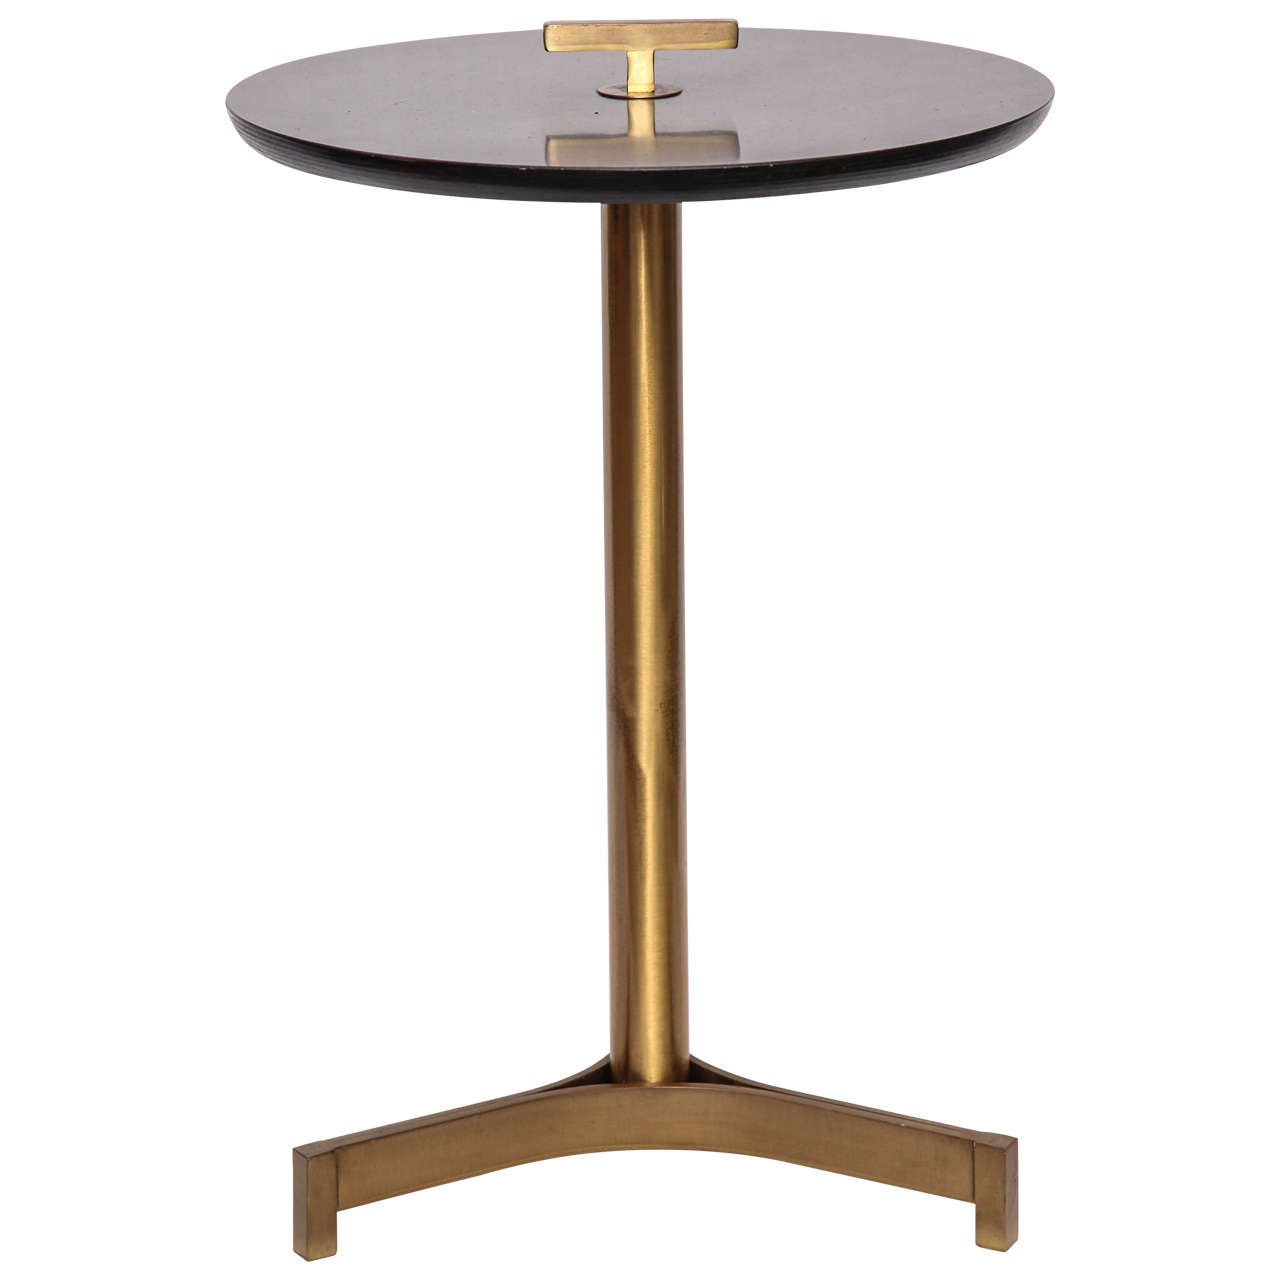 1950s Modernist Architectural Brass and Bakelite Side Table